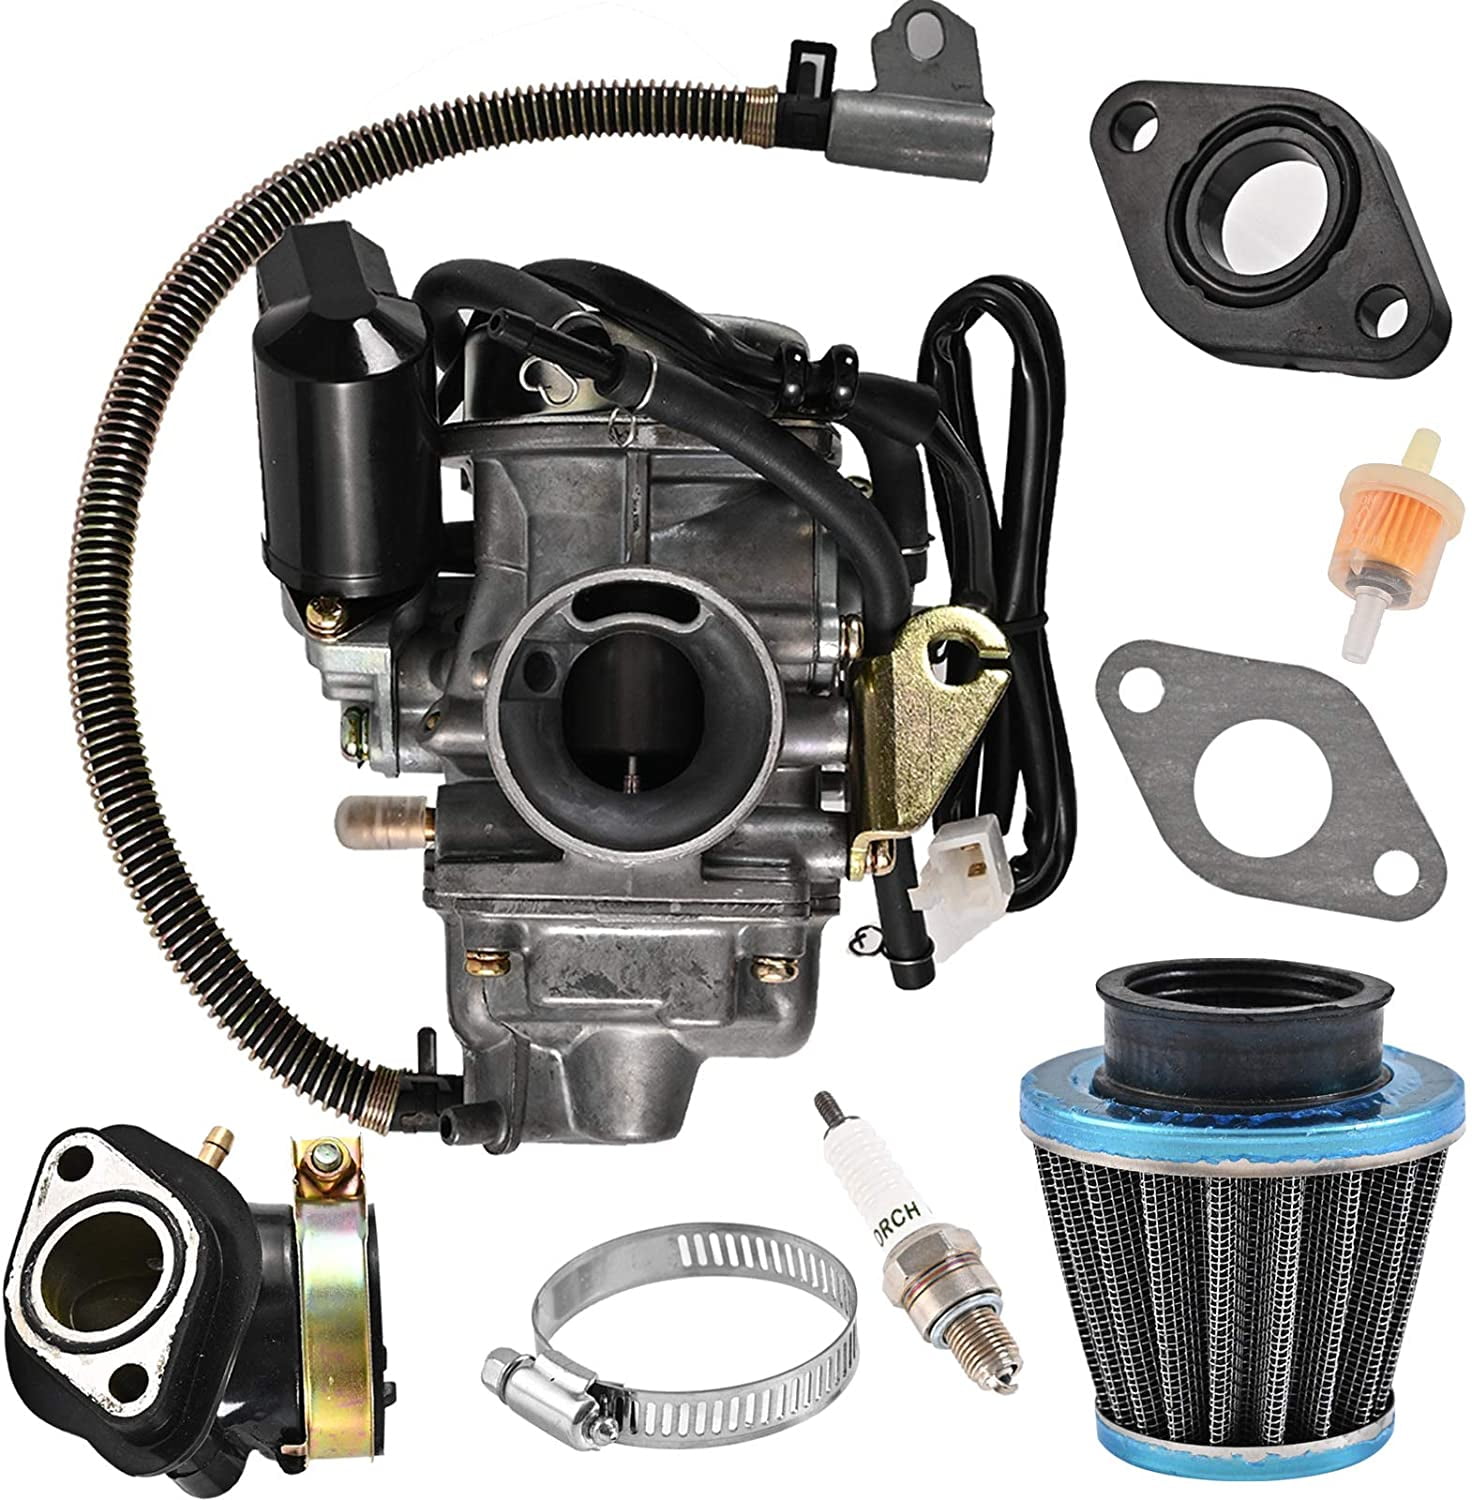 150cc Carburetor For GY6 With Air Filter Intake & Manifold Mopeds & Scooters 